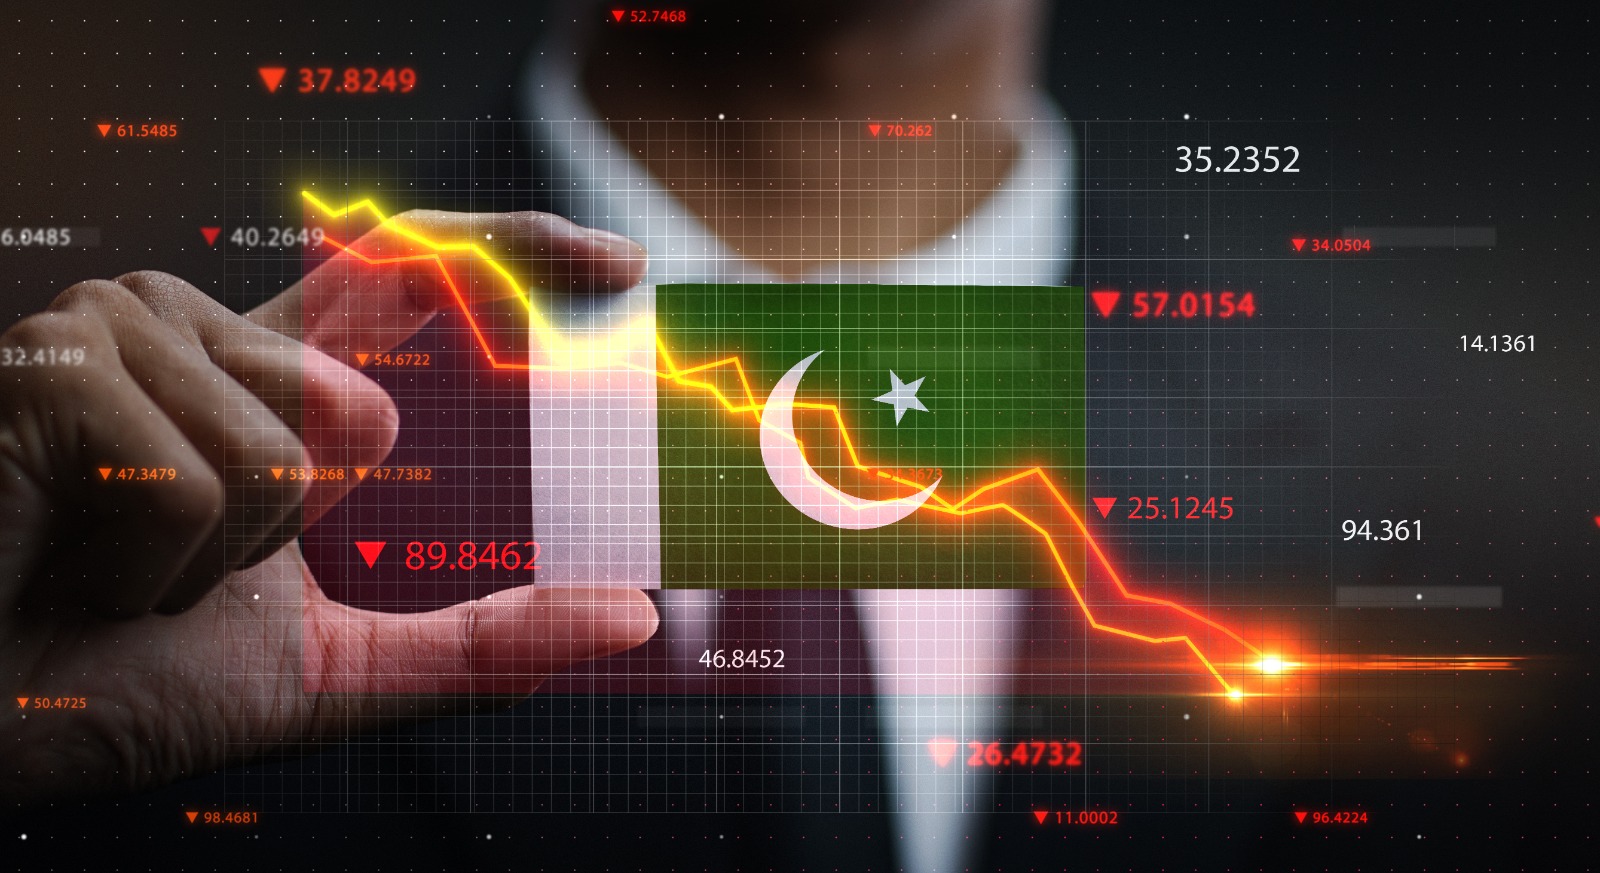 PSX crashes by over 1,750 points